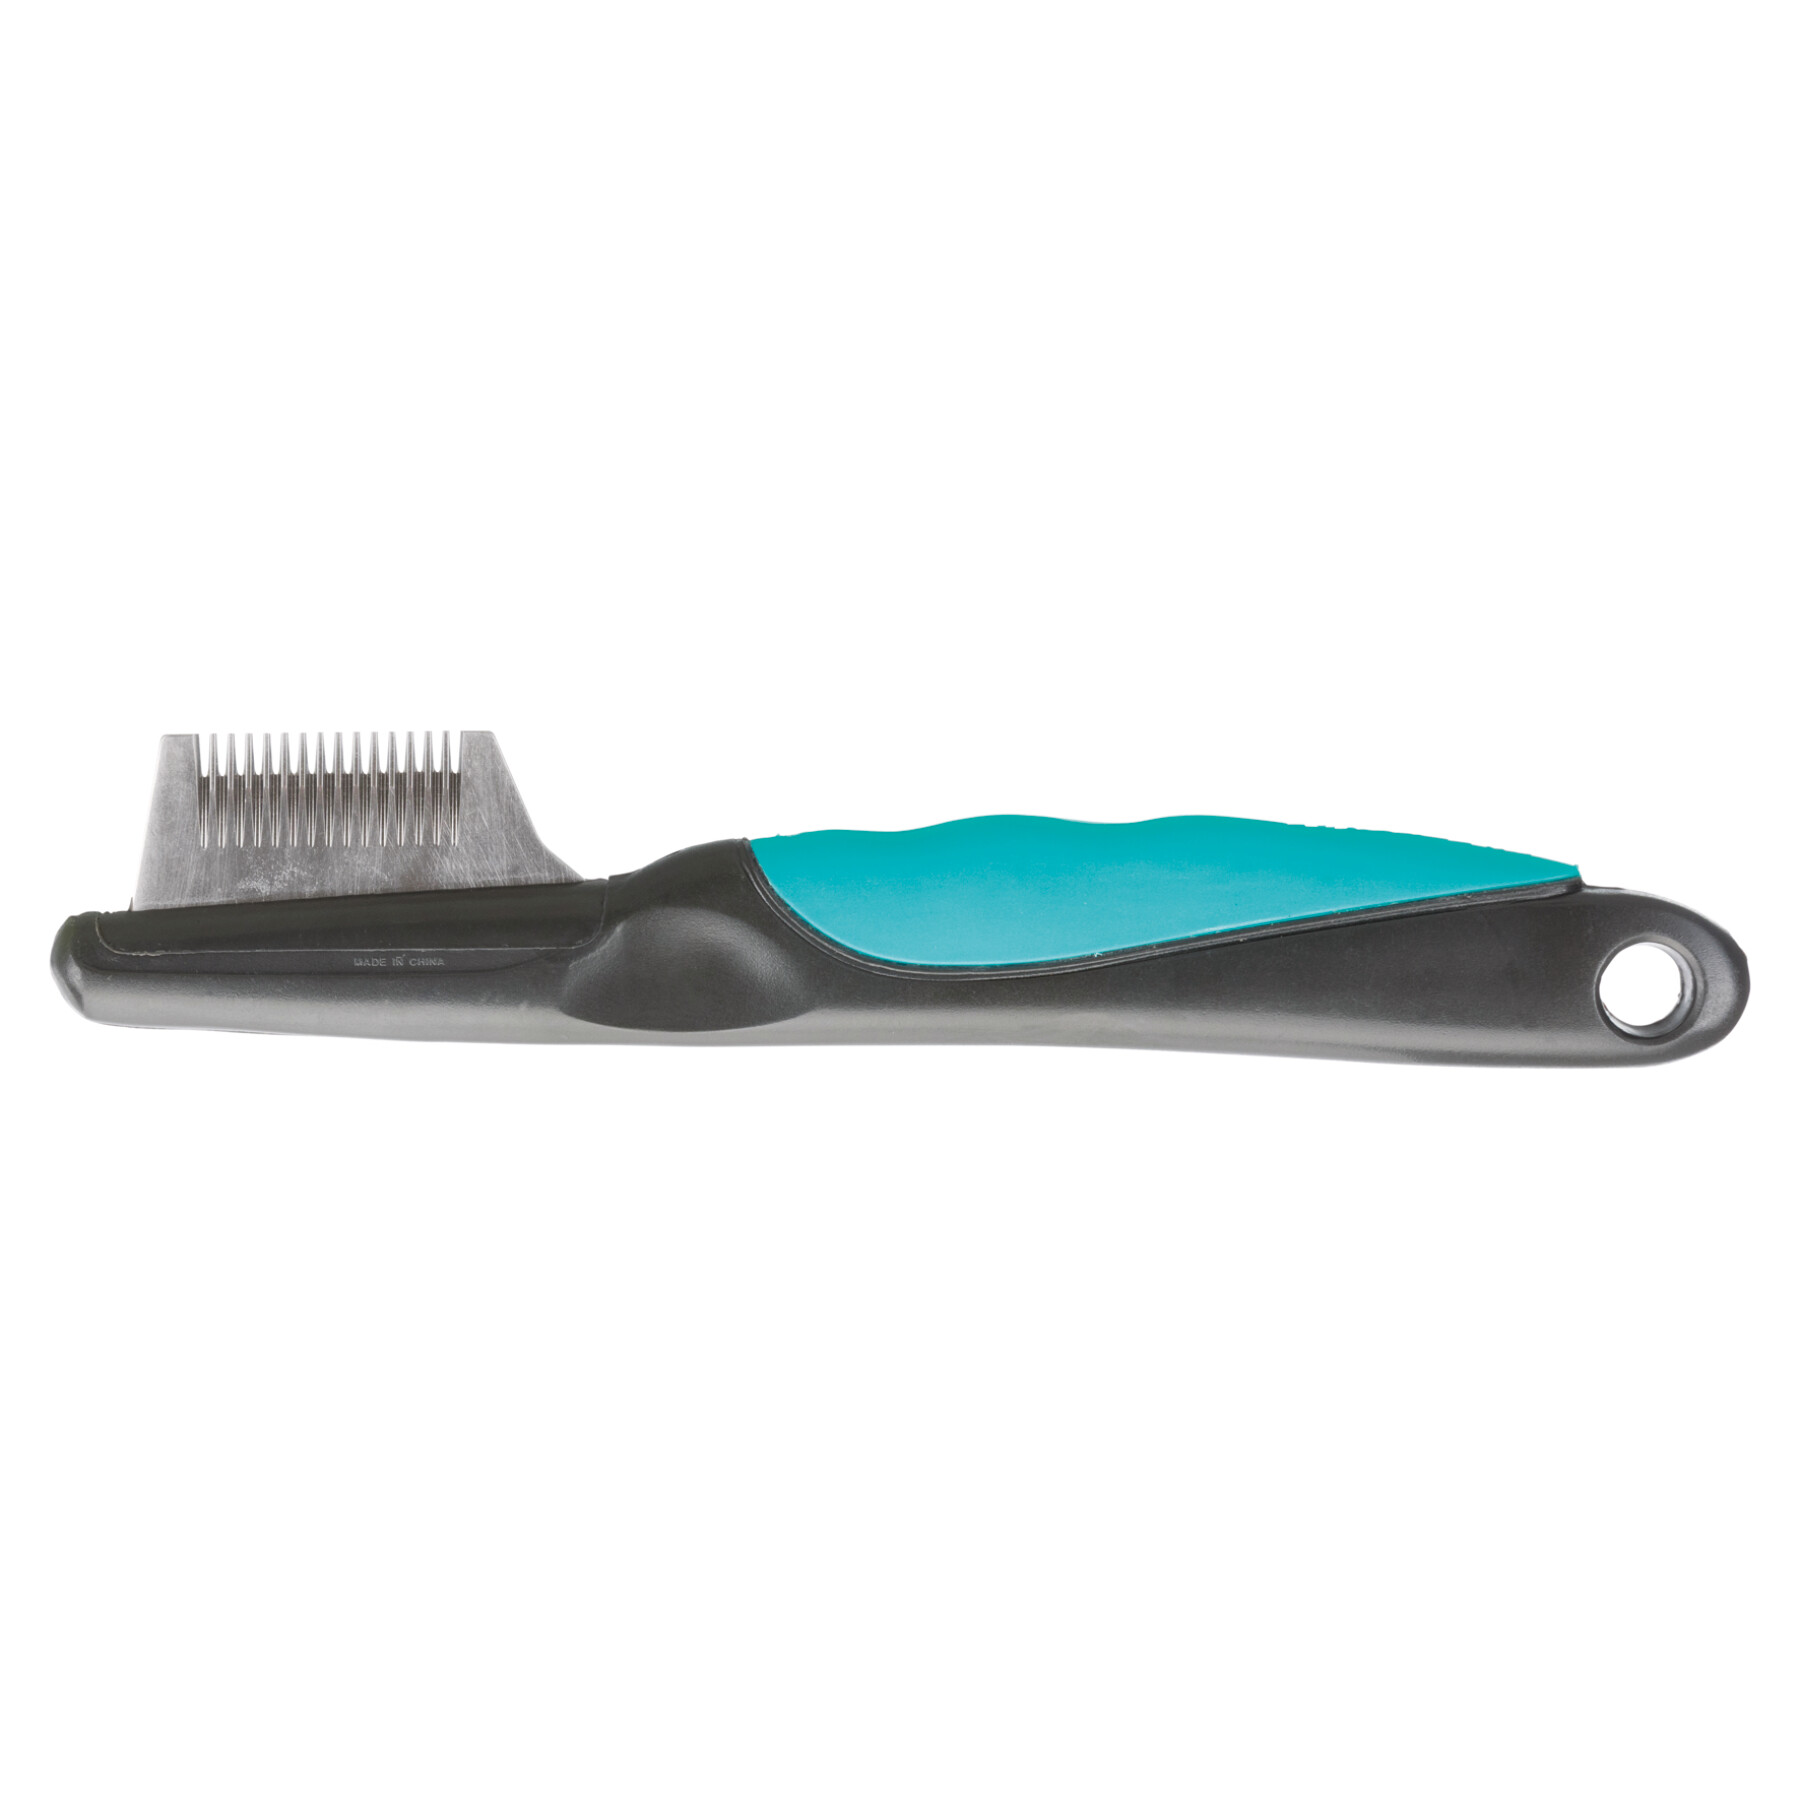 Plastic/stainless steel thick dog comb Trixie (x3)